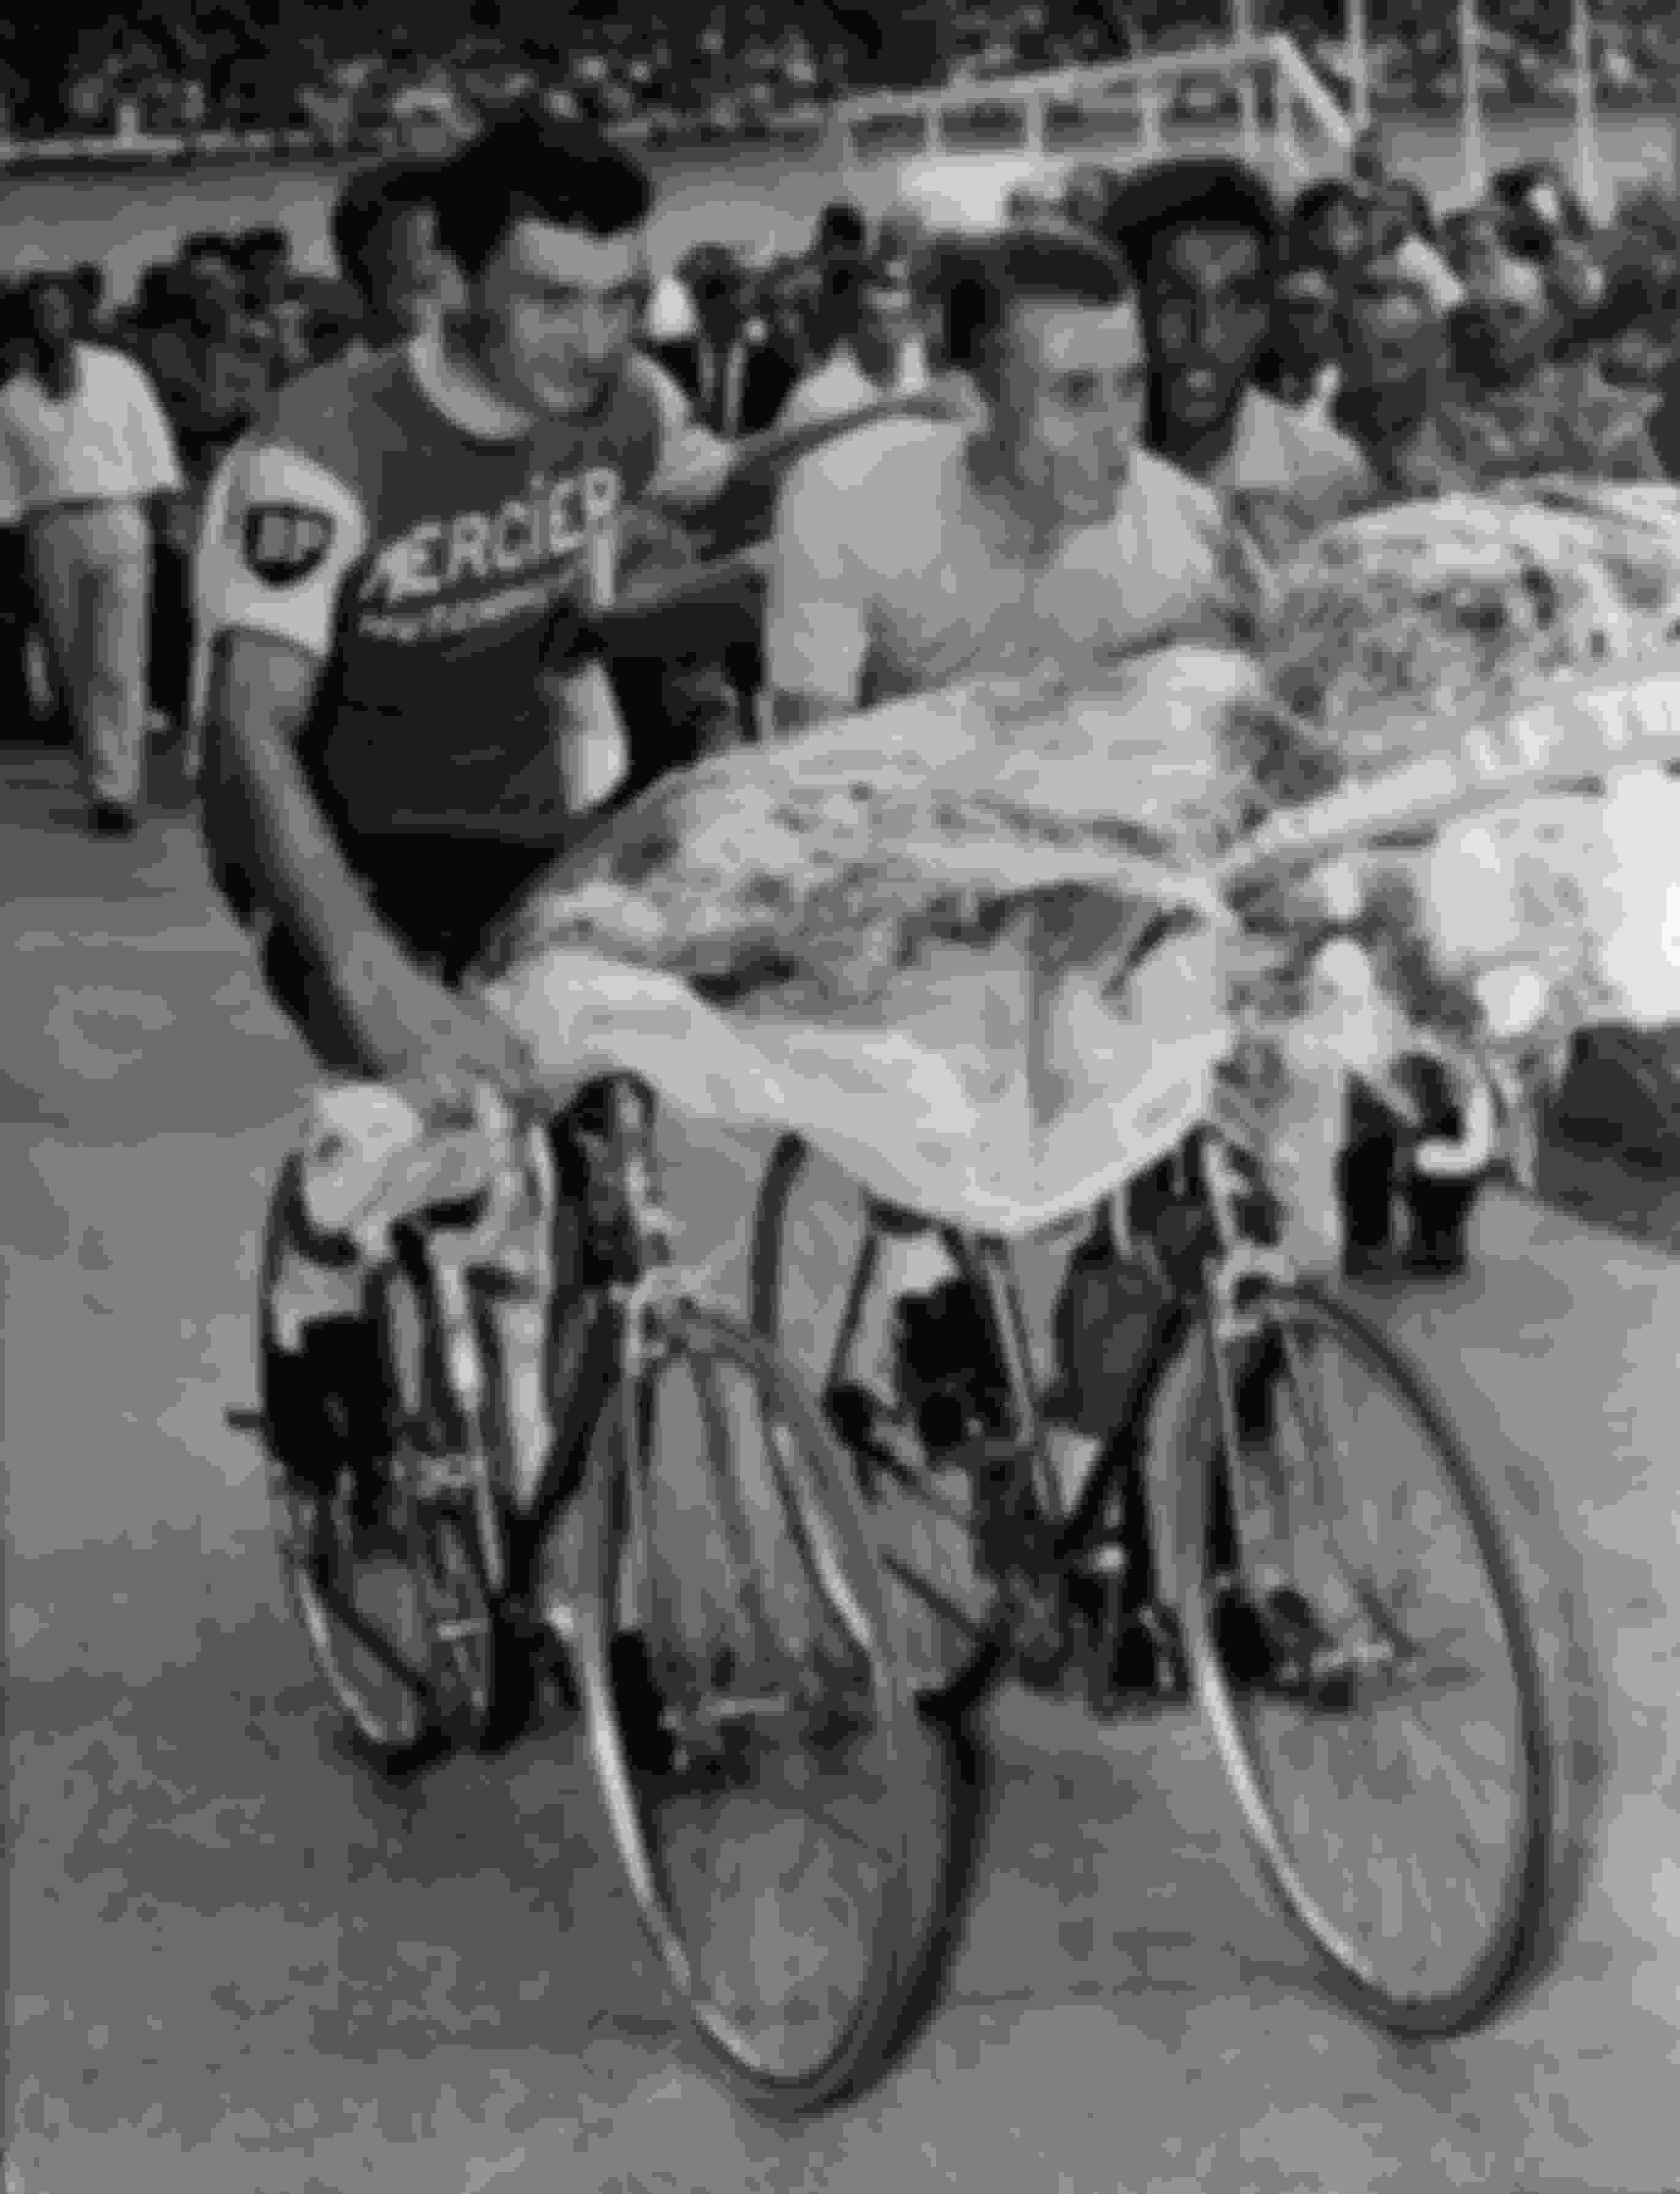 Runner-up Raymond Poulidor (L) congratulates Jacques Anquetil on his fifth consecutive Tour de France win in July 1964.